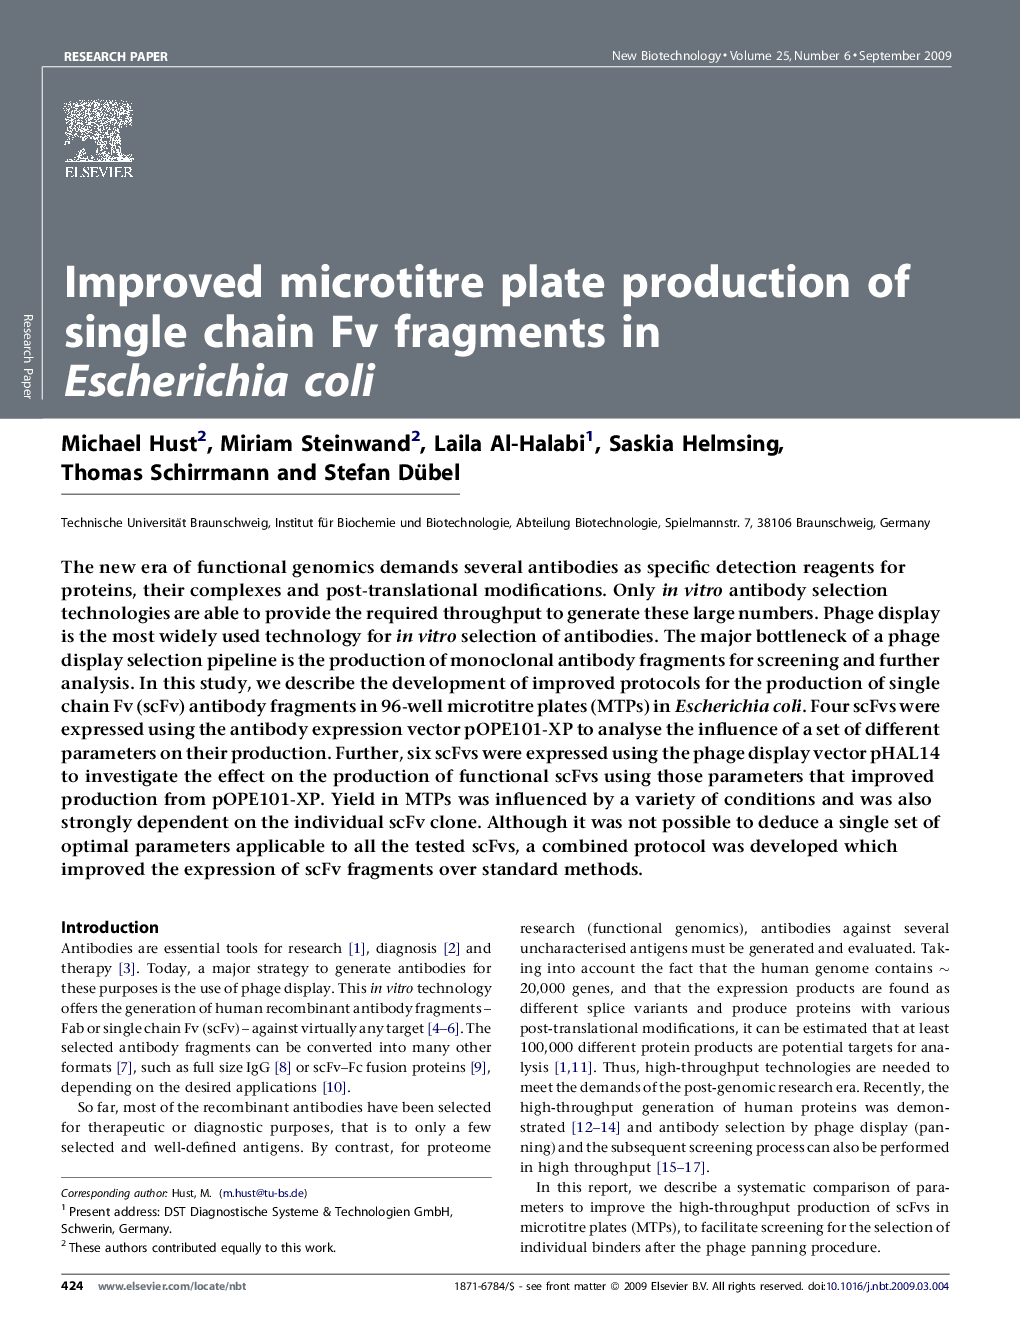 Improved microtitre plate production of single chain Fv fragments in Escherichia coli